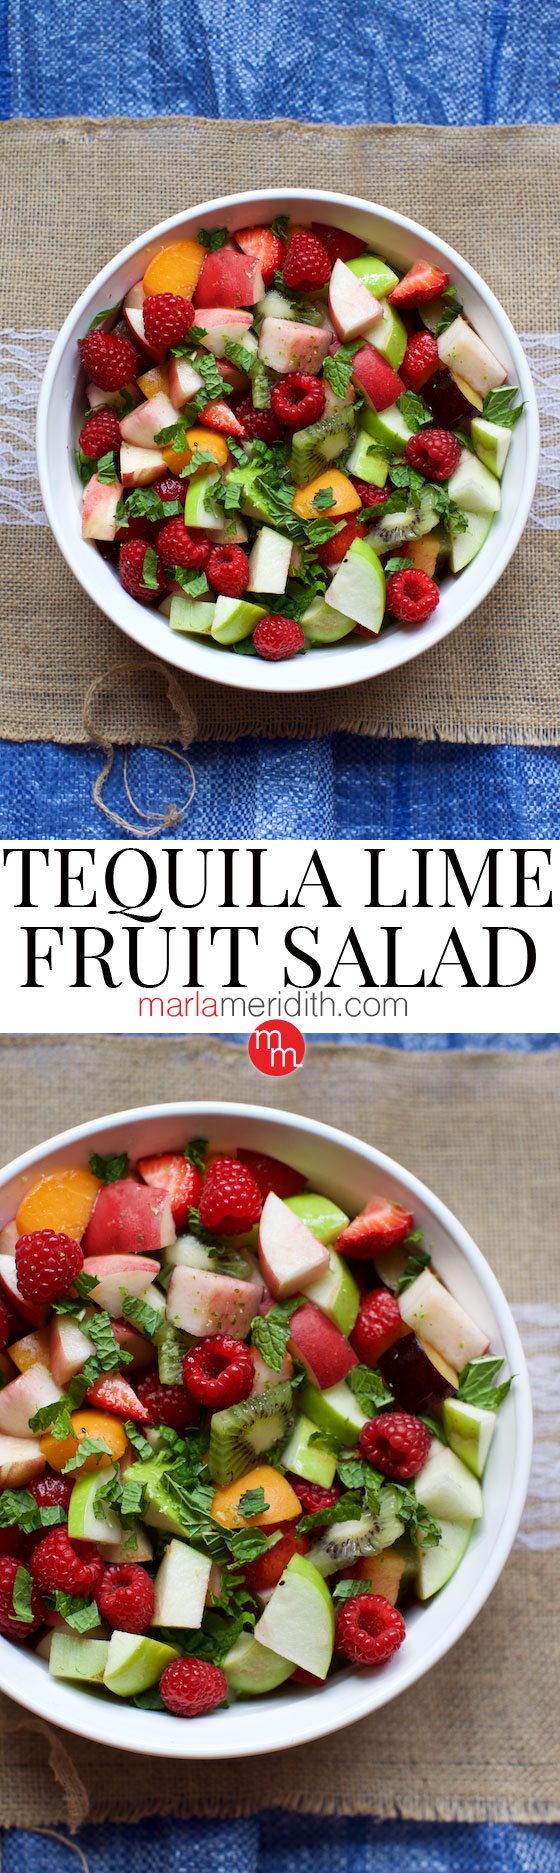 Satisfy your summer sweet teeth with this healthy dessert. TEQUILA LIME FRUIT SALAD a #vegan #recipe MarlaMeridith.com ( @marlameridith )